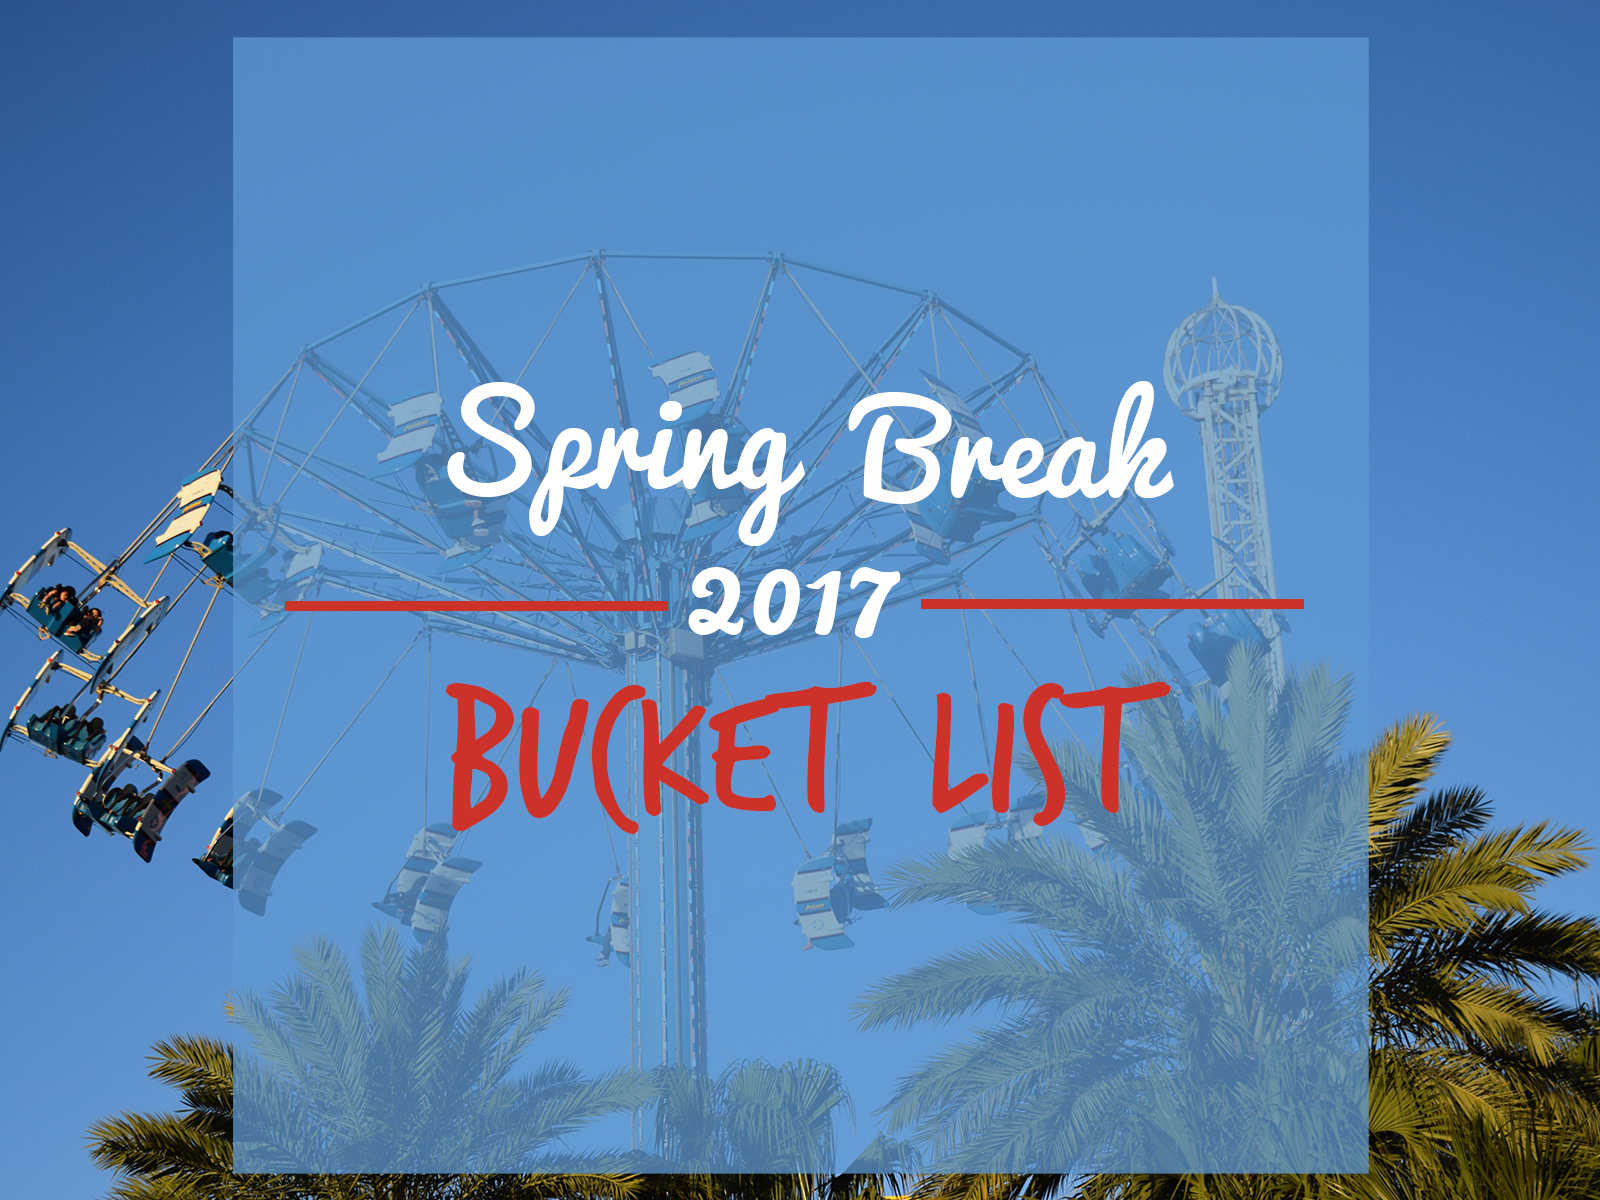 GRAPHIC: The Kemah Boardwalk ride the "Aviator" is shown with palm trees and the words "Spring Break 2017 Bucket List" are overlaid on the image. Graphic by The Signal reporter Krista Kamp.